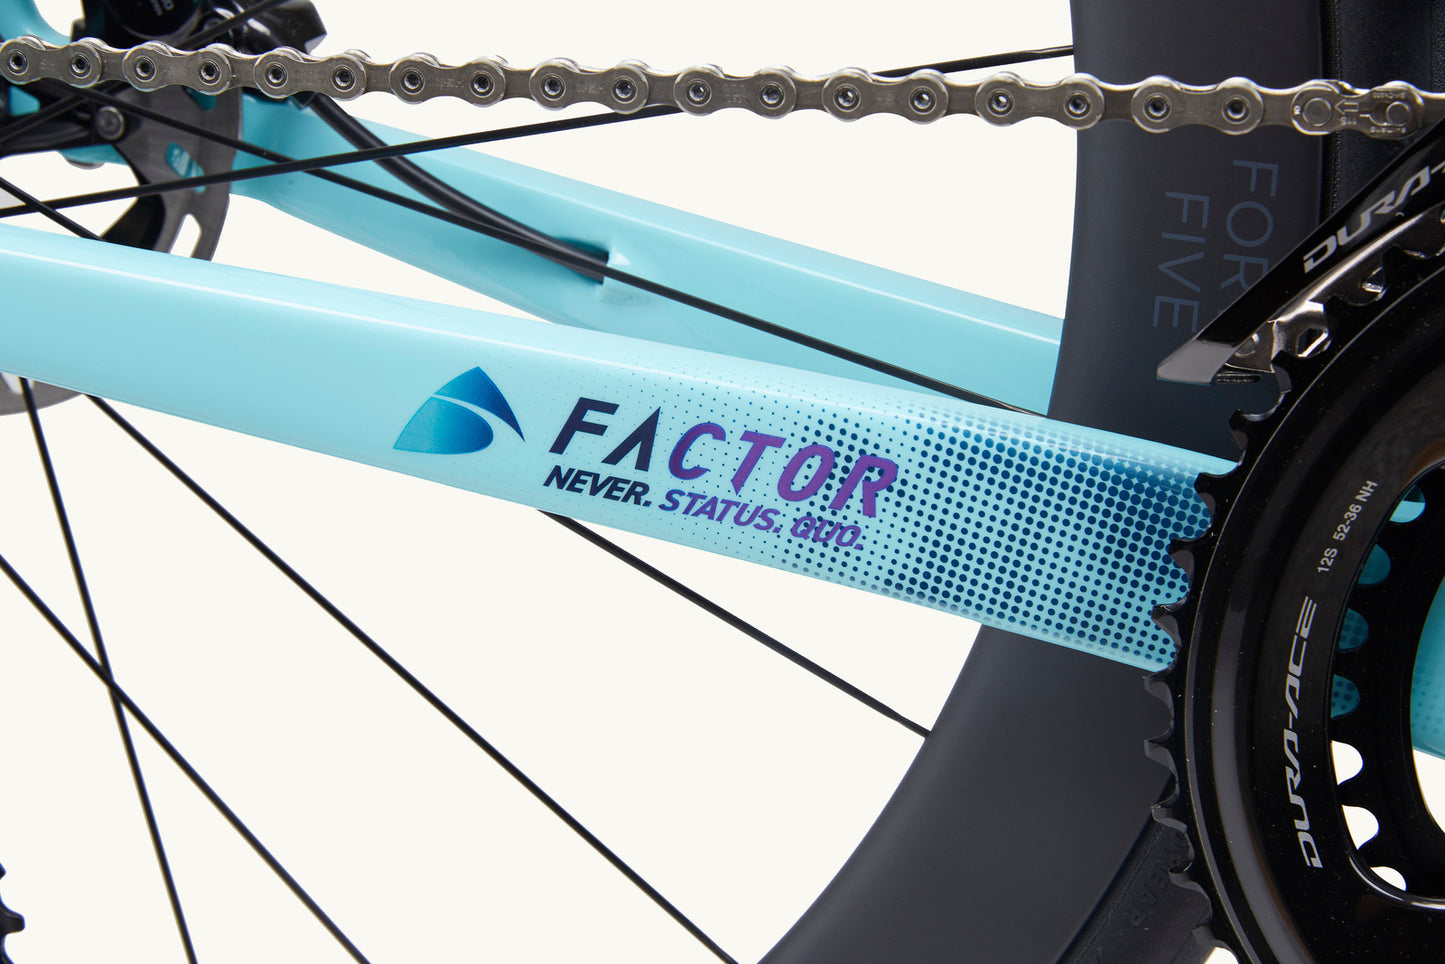 Bicicleta Factor Ostro V.A.M Limited Edition Oceanic